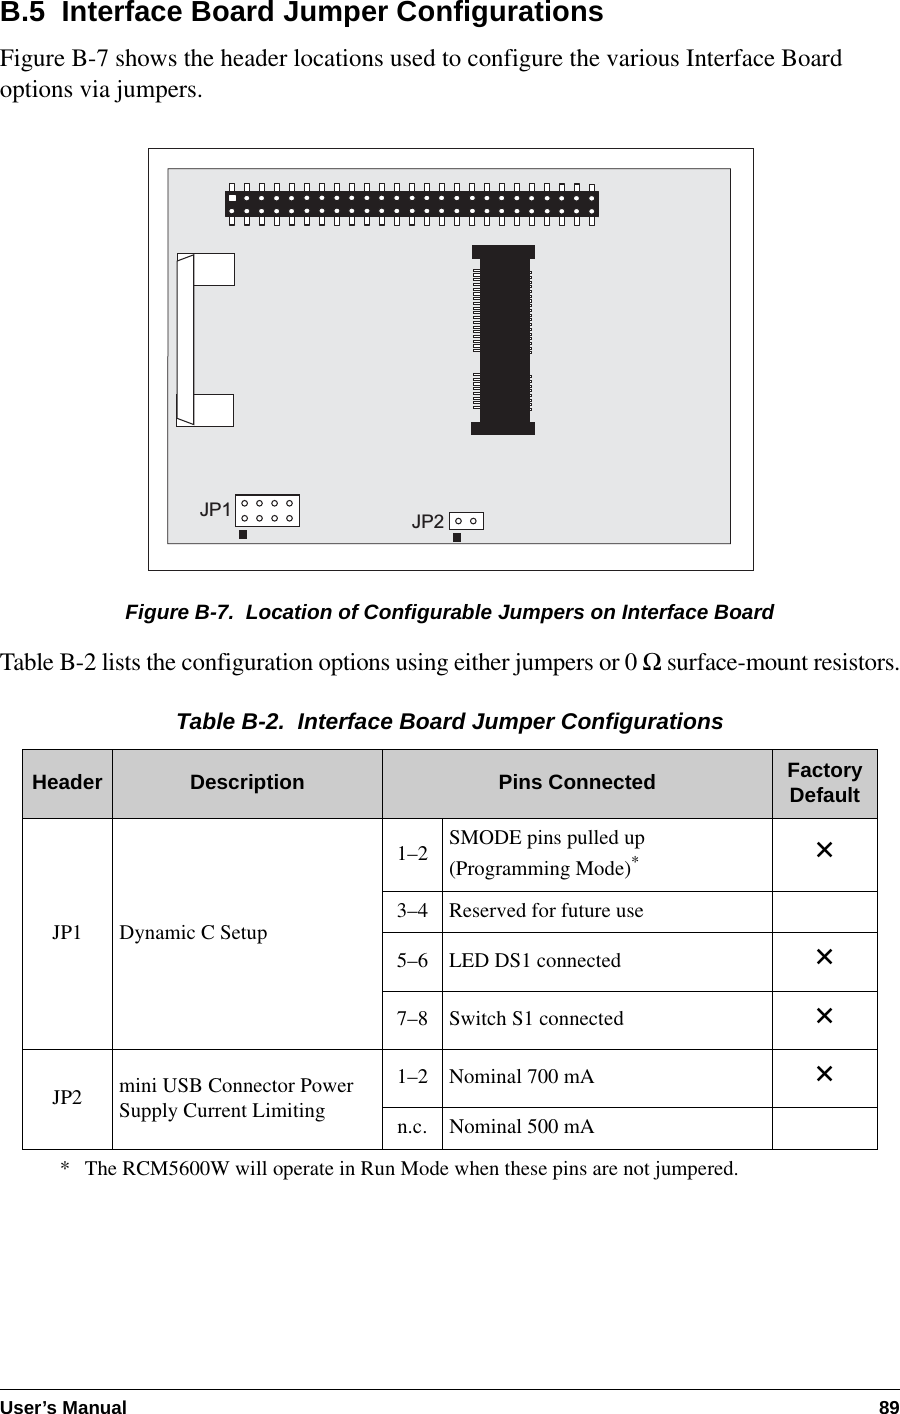 User’s Manual 89B.5  Interface Board Jumper ConfigurationsFigure B-7 shows the header locations used to configure the various Interface Board options via jumpers. Figure B-7.  Location of Configurable Jumpers on Interface BoardTable B-2 lists the configuration options using either jumpers or 0 Ω surface-mount resistors.Table B-2.  Interface Board Jumper ConfigurationsHeader Description Pins Connected Factory DefaultJP1 Dynamic C Setup1–2 SMODE pins pulled up(Programming Mode)** The RCM5600W will operate in Run Mode when these pins are not jumpered.×3–4 Reserved for future use5–6 LED DS1 connected ×7–8 Switch S1 connected ×JP2 mini USB Connector Power Supply Current Limiting1–2 Nominal 700 mA ×n.c. Nominal 500 mAJP1 JP2